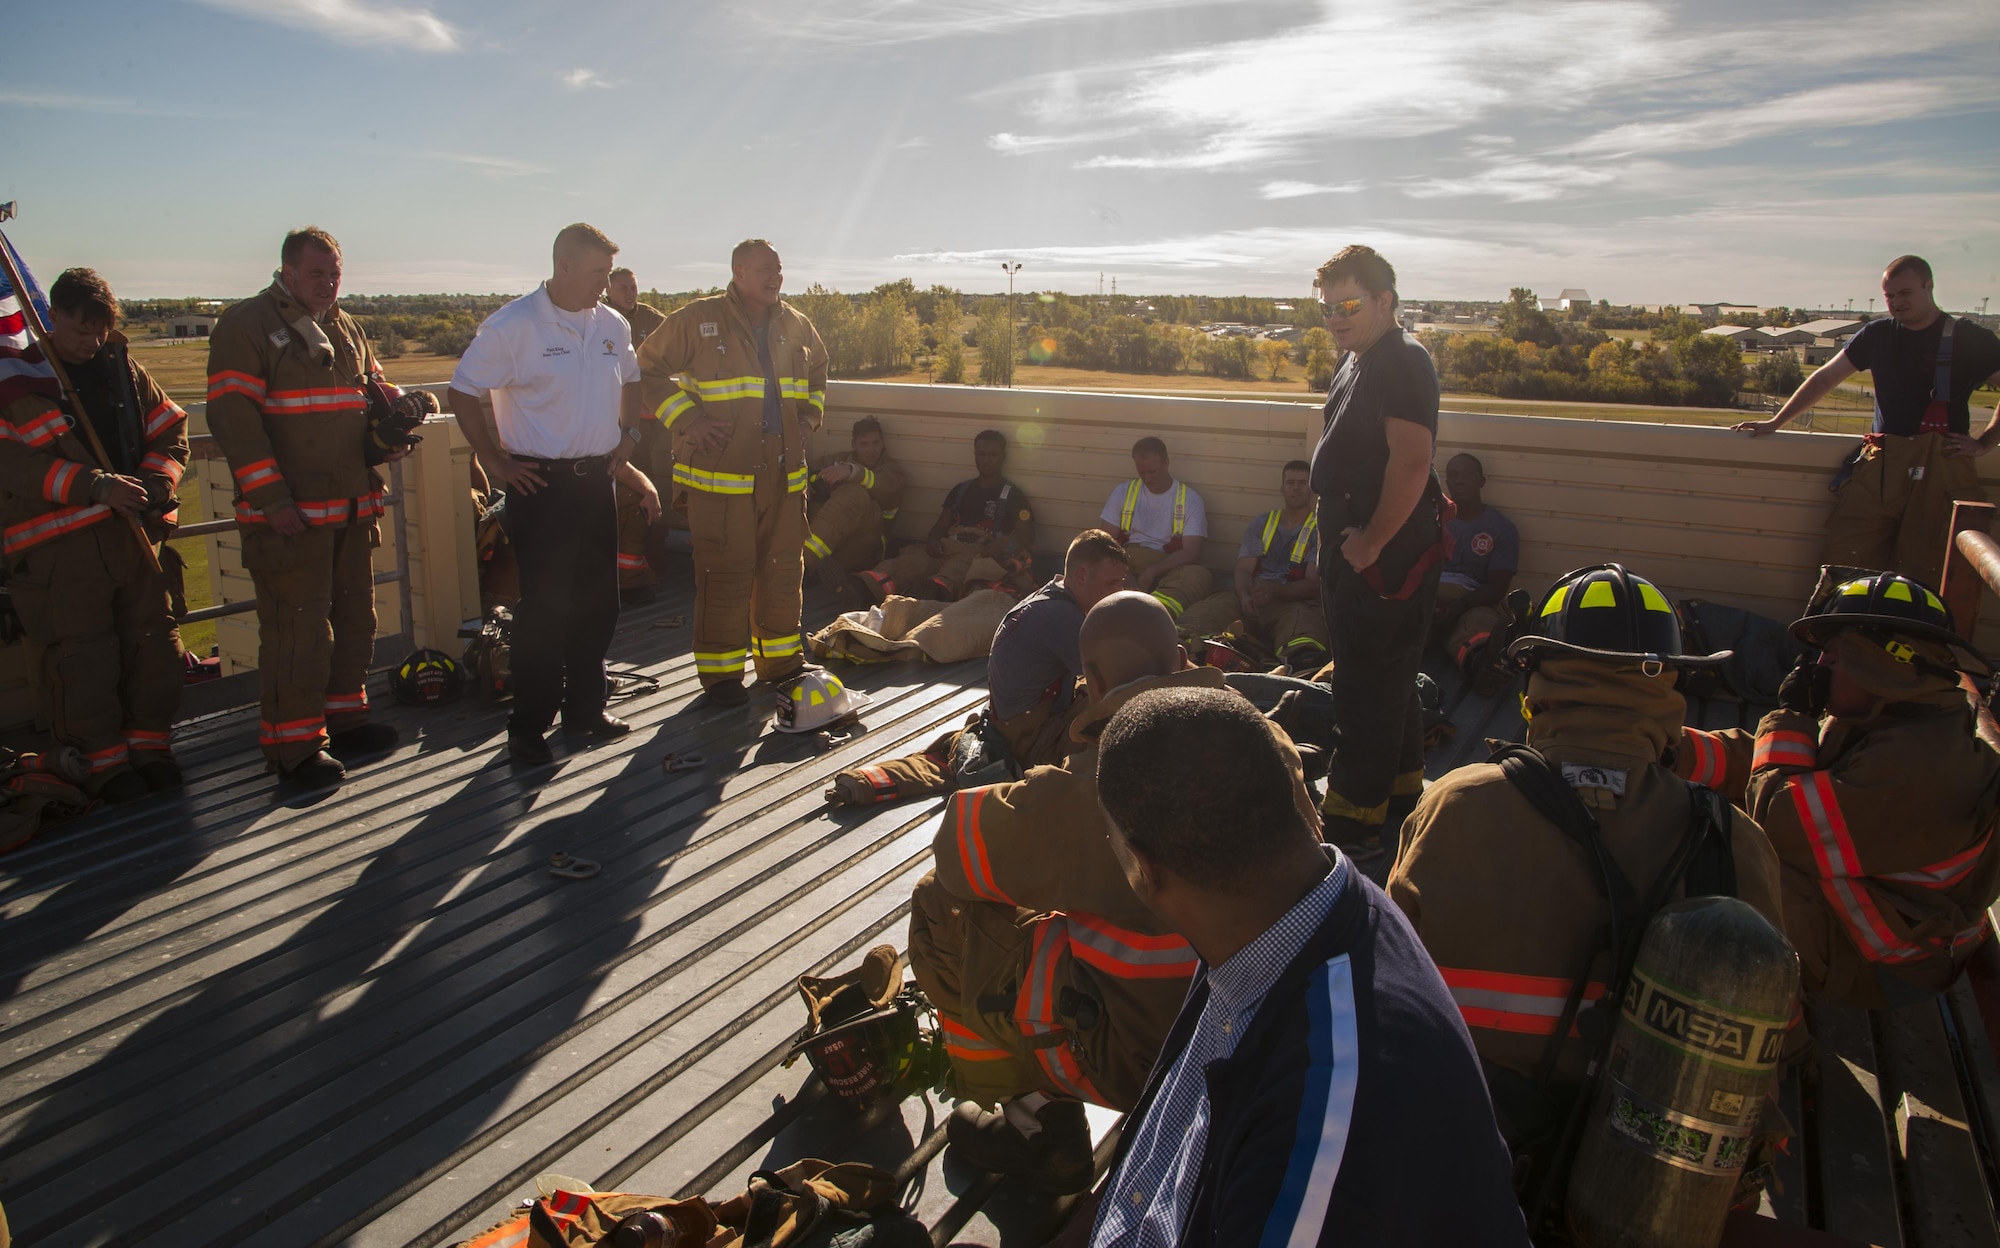 Minot Air Force Base firefighters catch their breath after climbing 110 flights of stairs in honor of 9/11 at Minot AFB, N.D., Sept. 11, 2016. The fire department climbed not only in honor of the innocent lives of the people that were in the towers already, but the 343 firefighters who lost their lives as well. (U.S. Air Force photo/Airman 1st Class Christian Sullivan)